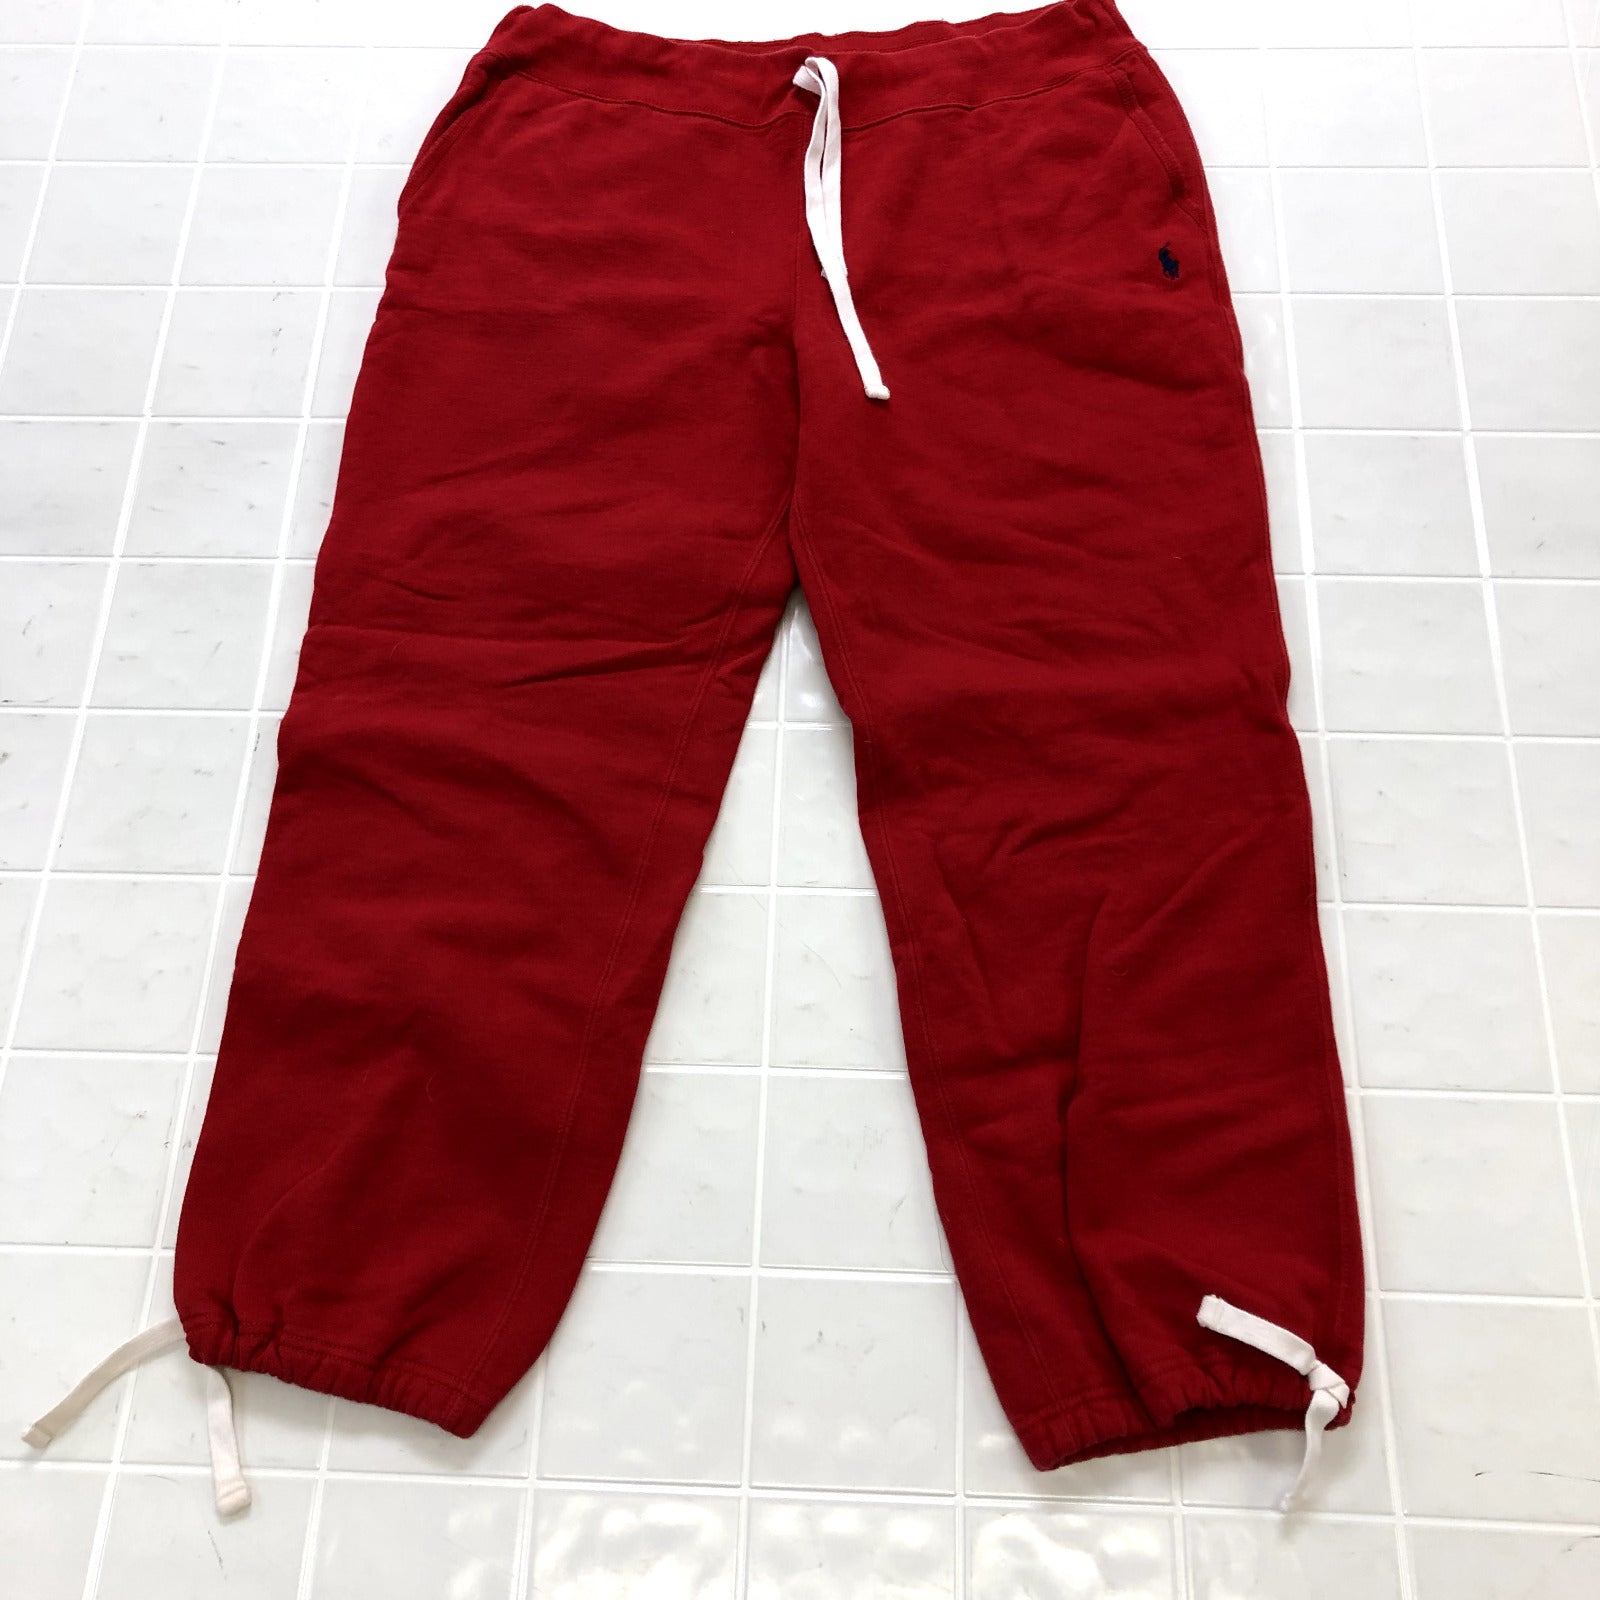 Polo Ralph Lauren Red Drawstring Waist Chino Casual Sweatpants Adult Size XL